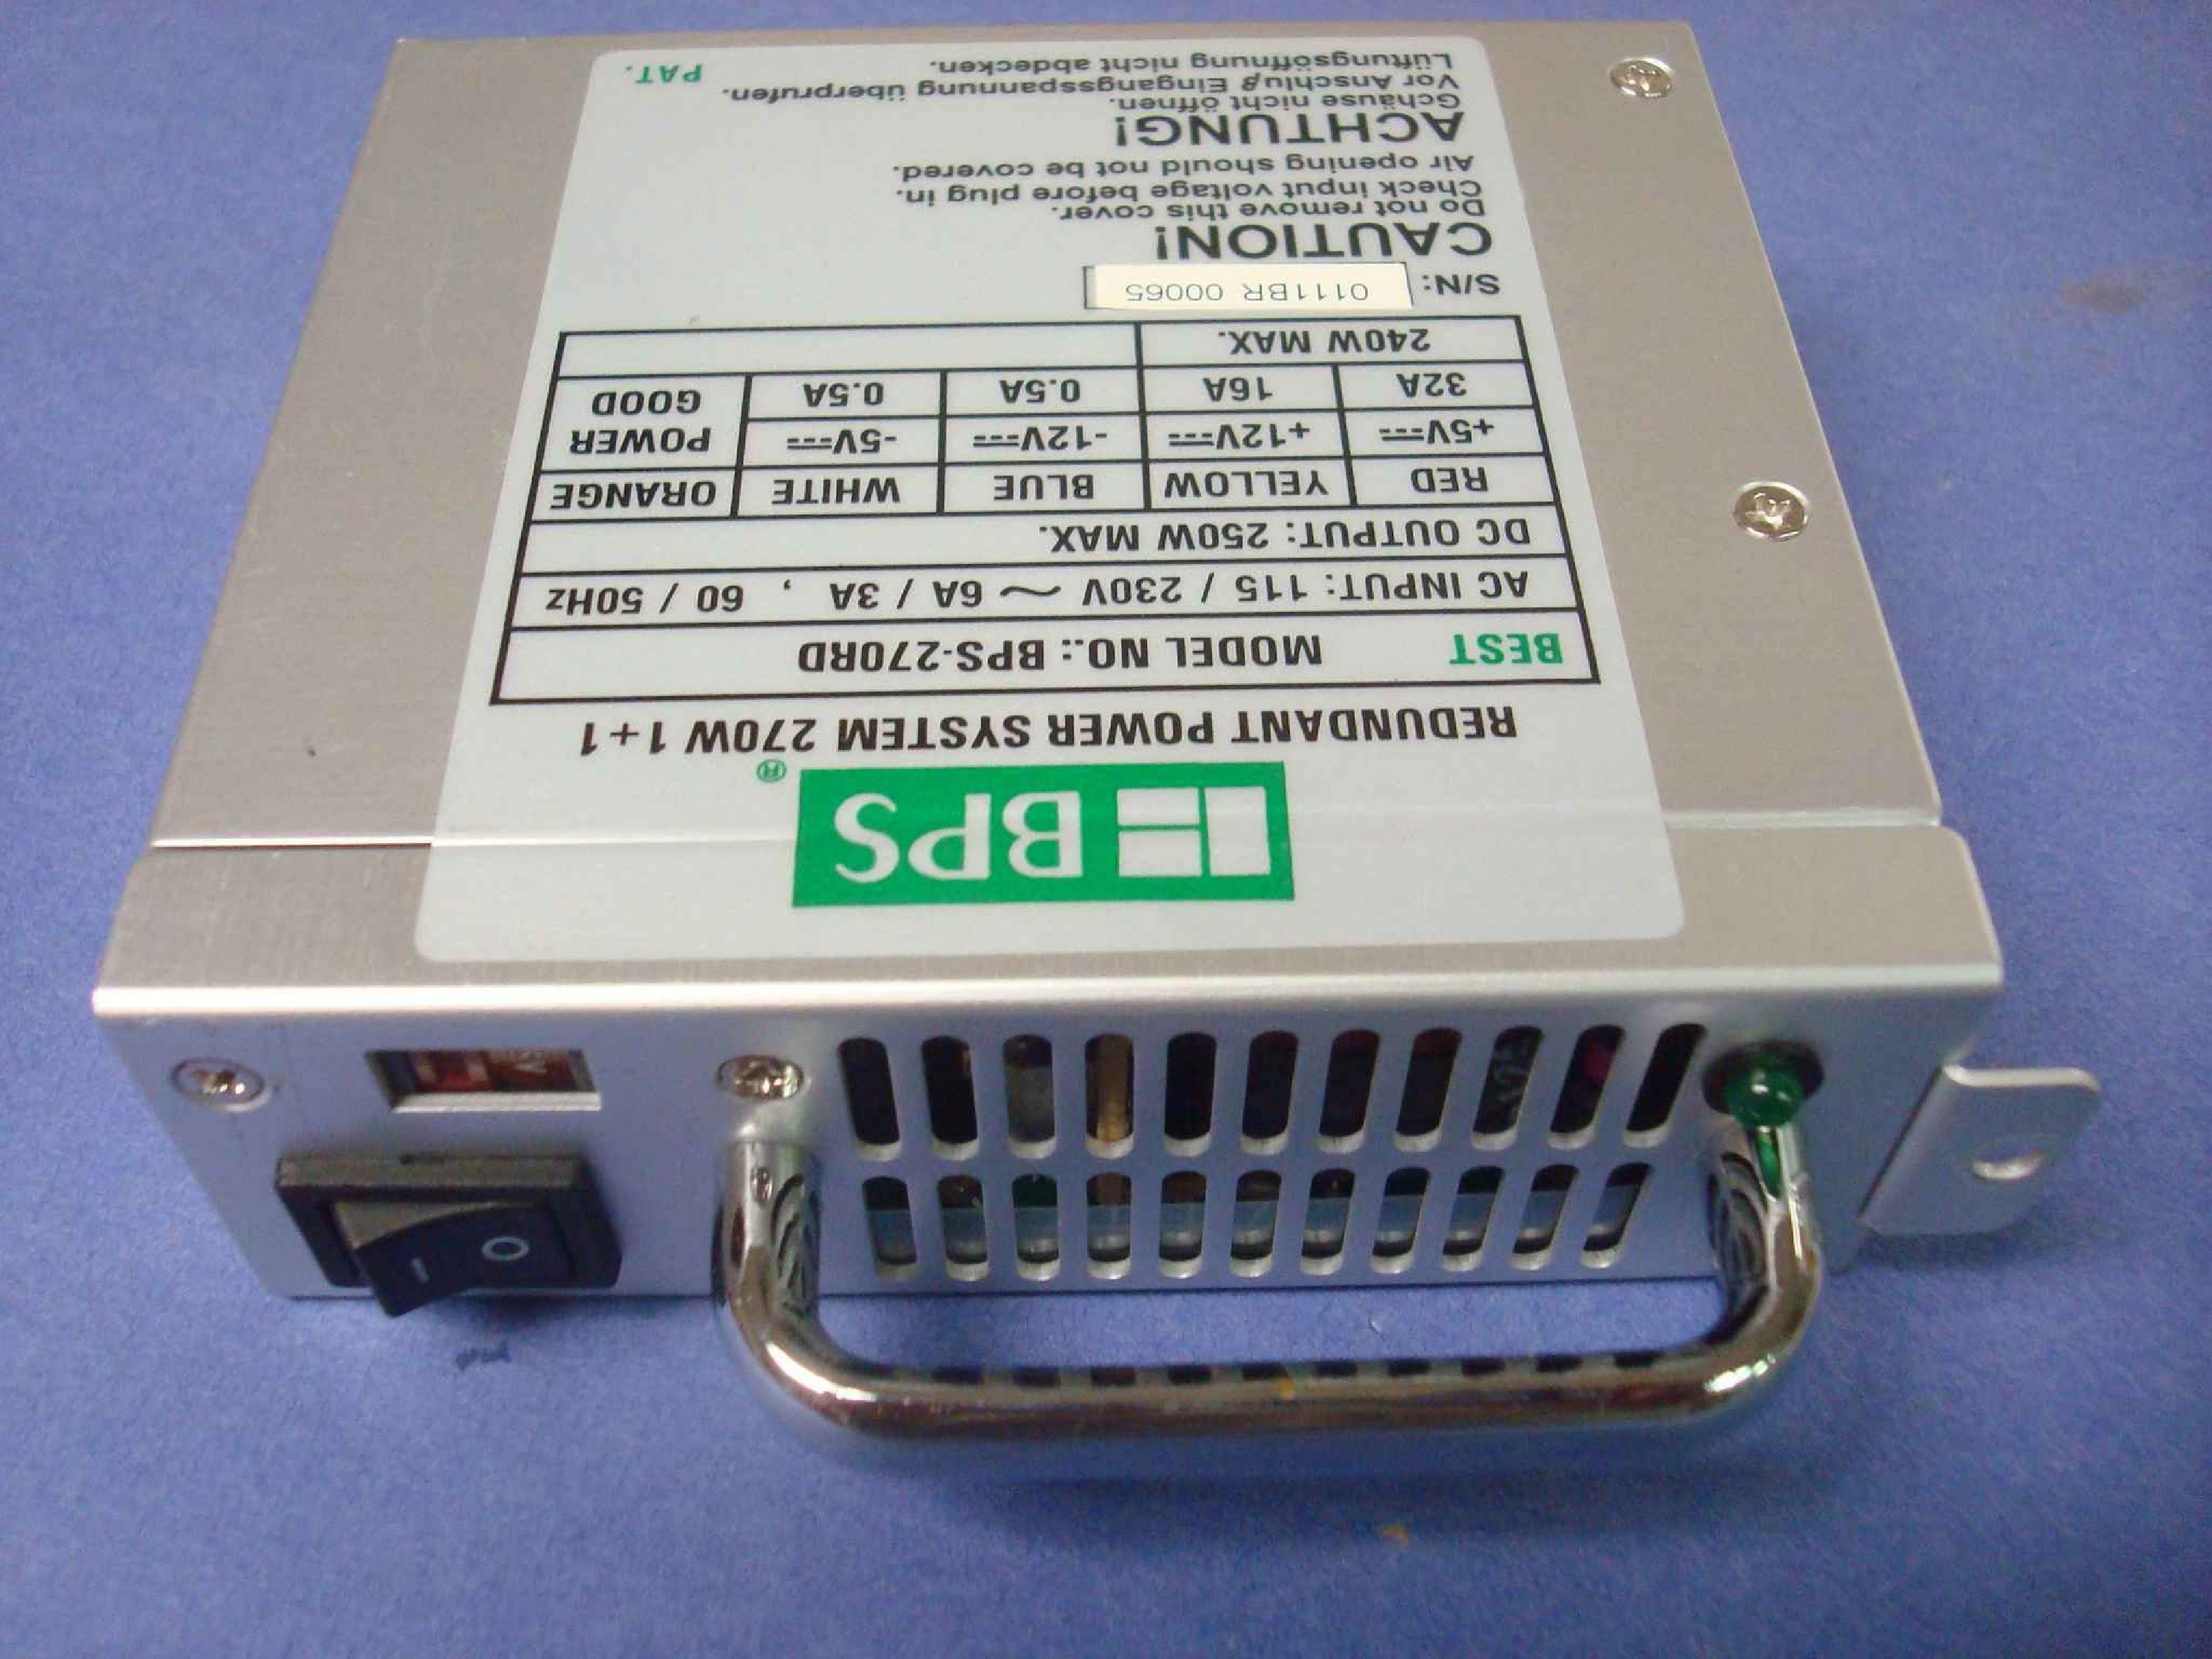 BPS BPS-270RDX REDUNDANT POWER SUPPLY WITH TWO HOT SWAP MODULES